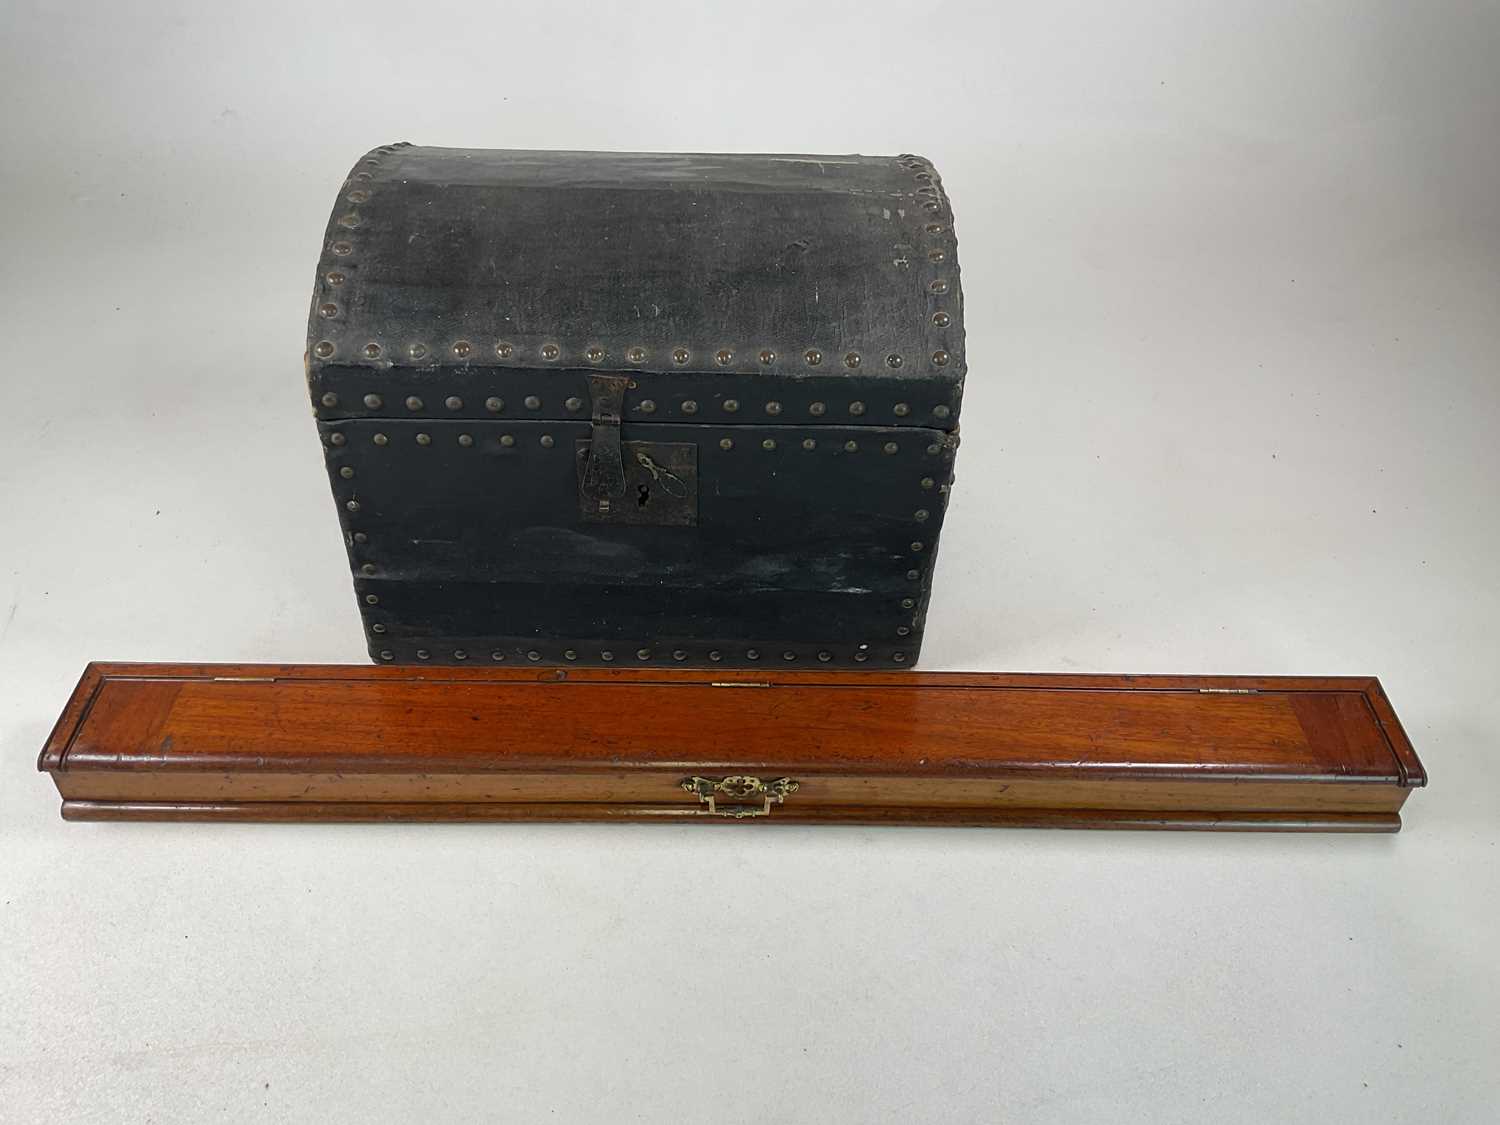 A mahogany desk top tidy, 6 x 87 x 9cm, and small black trunk with studs, 30 x 40 x 32cm.